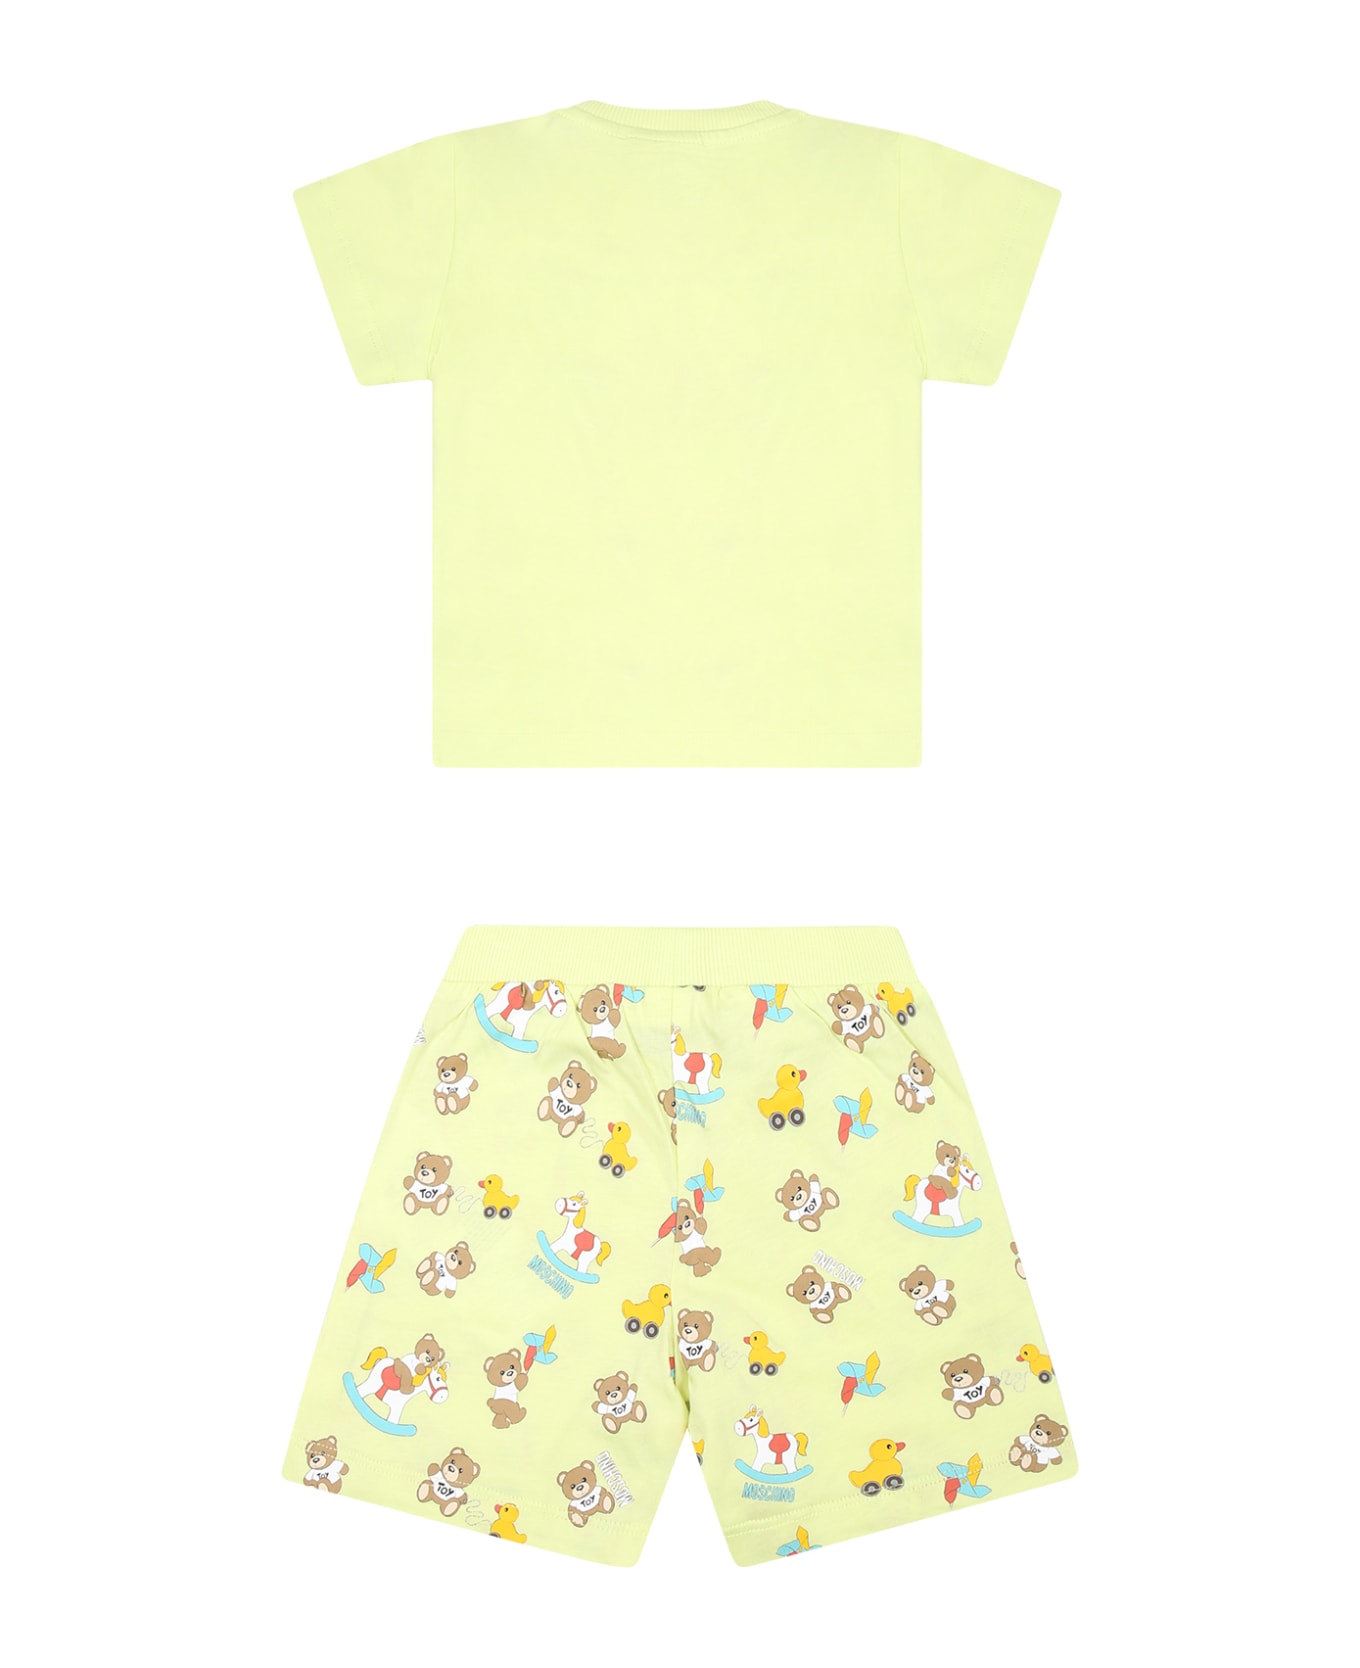 Moschino Yellow Suit For Baby Boy With Teddy Bear And Pinwheel - Yellow